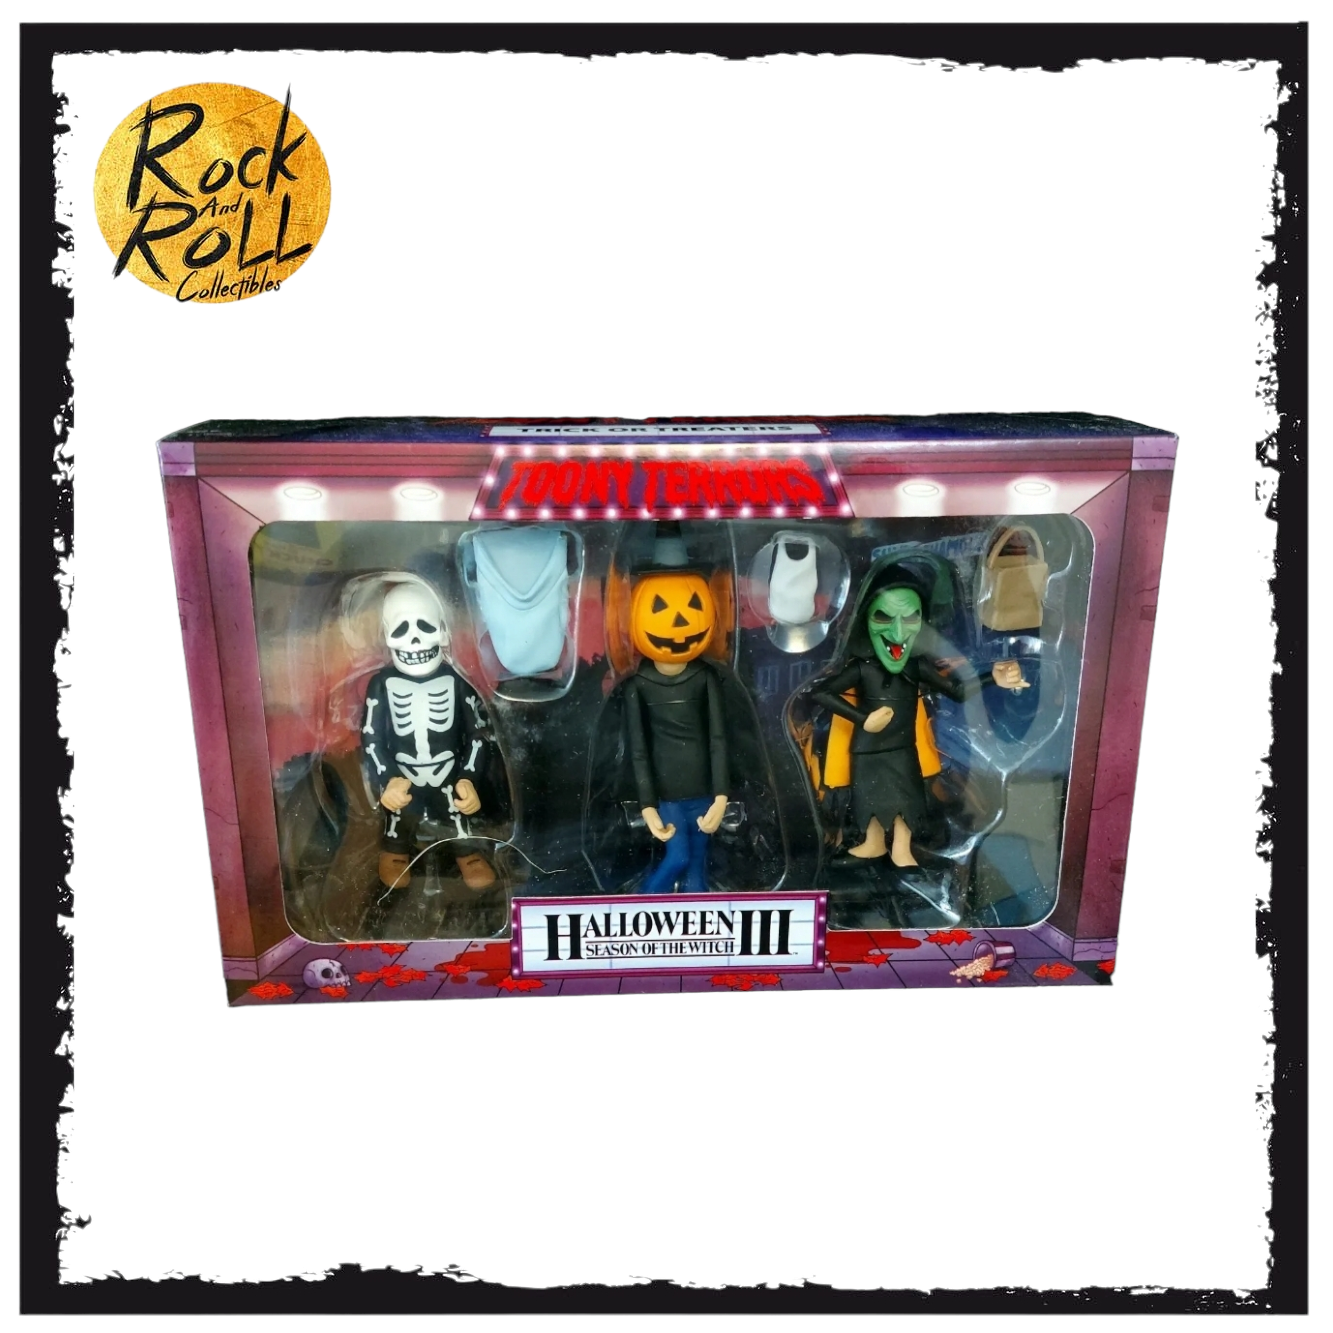 Neca Toony Terrors Halloween 3 Season of Witch Trick or Treaters 3-pack